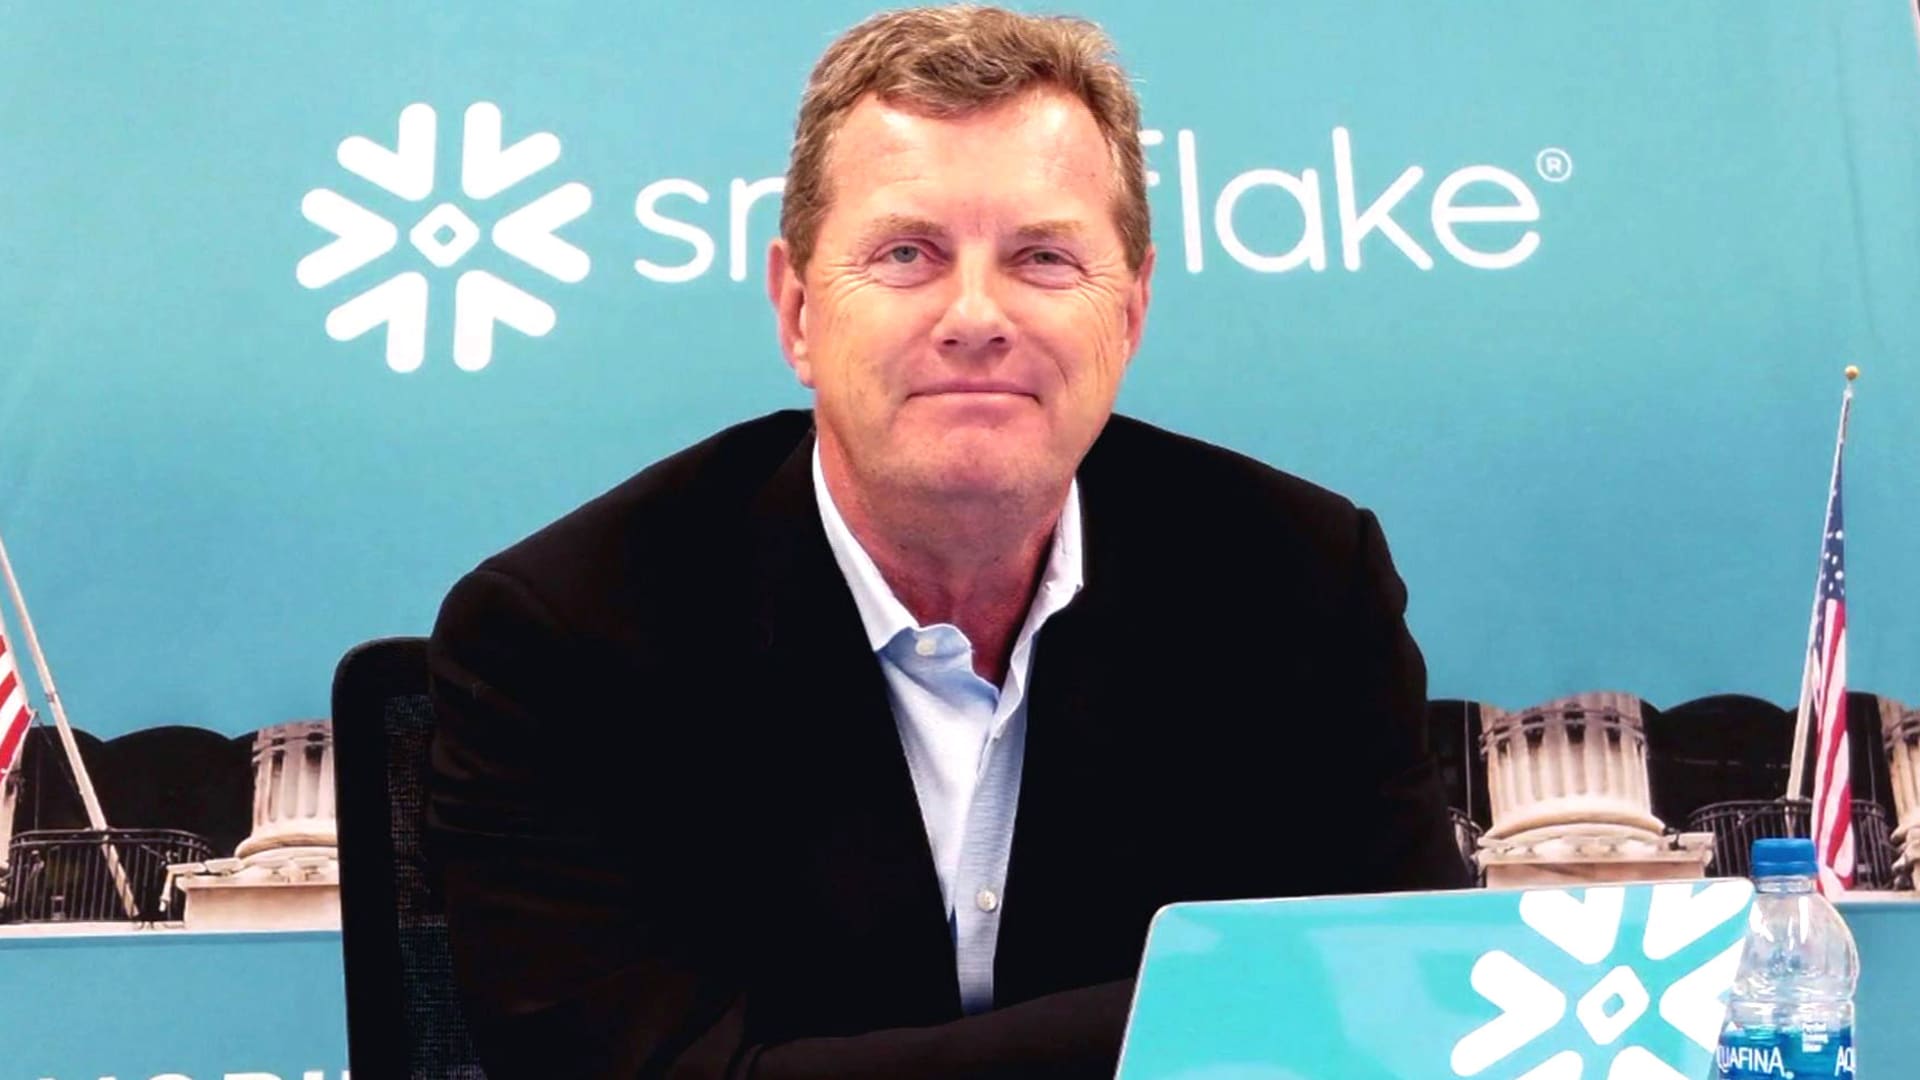 Snowflake says Frank Slootman is retiring as CEO; stock plunges 20%